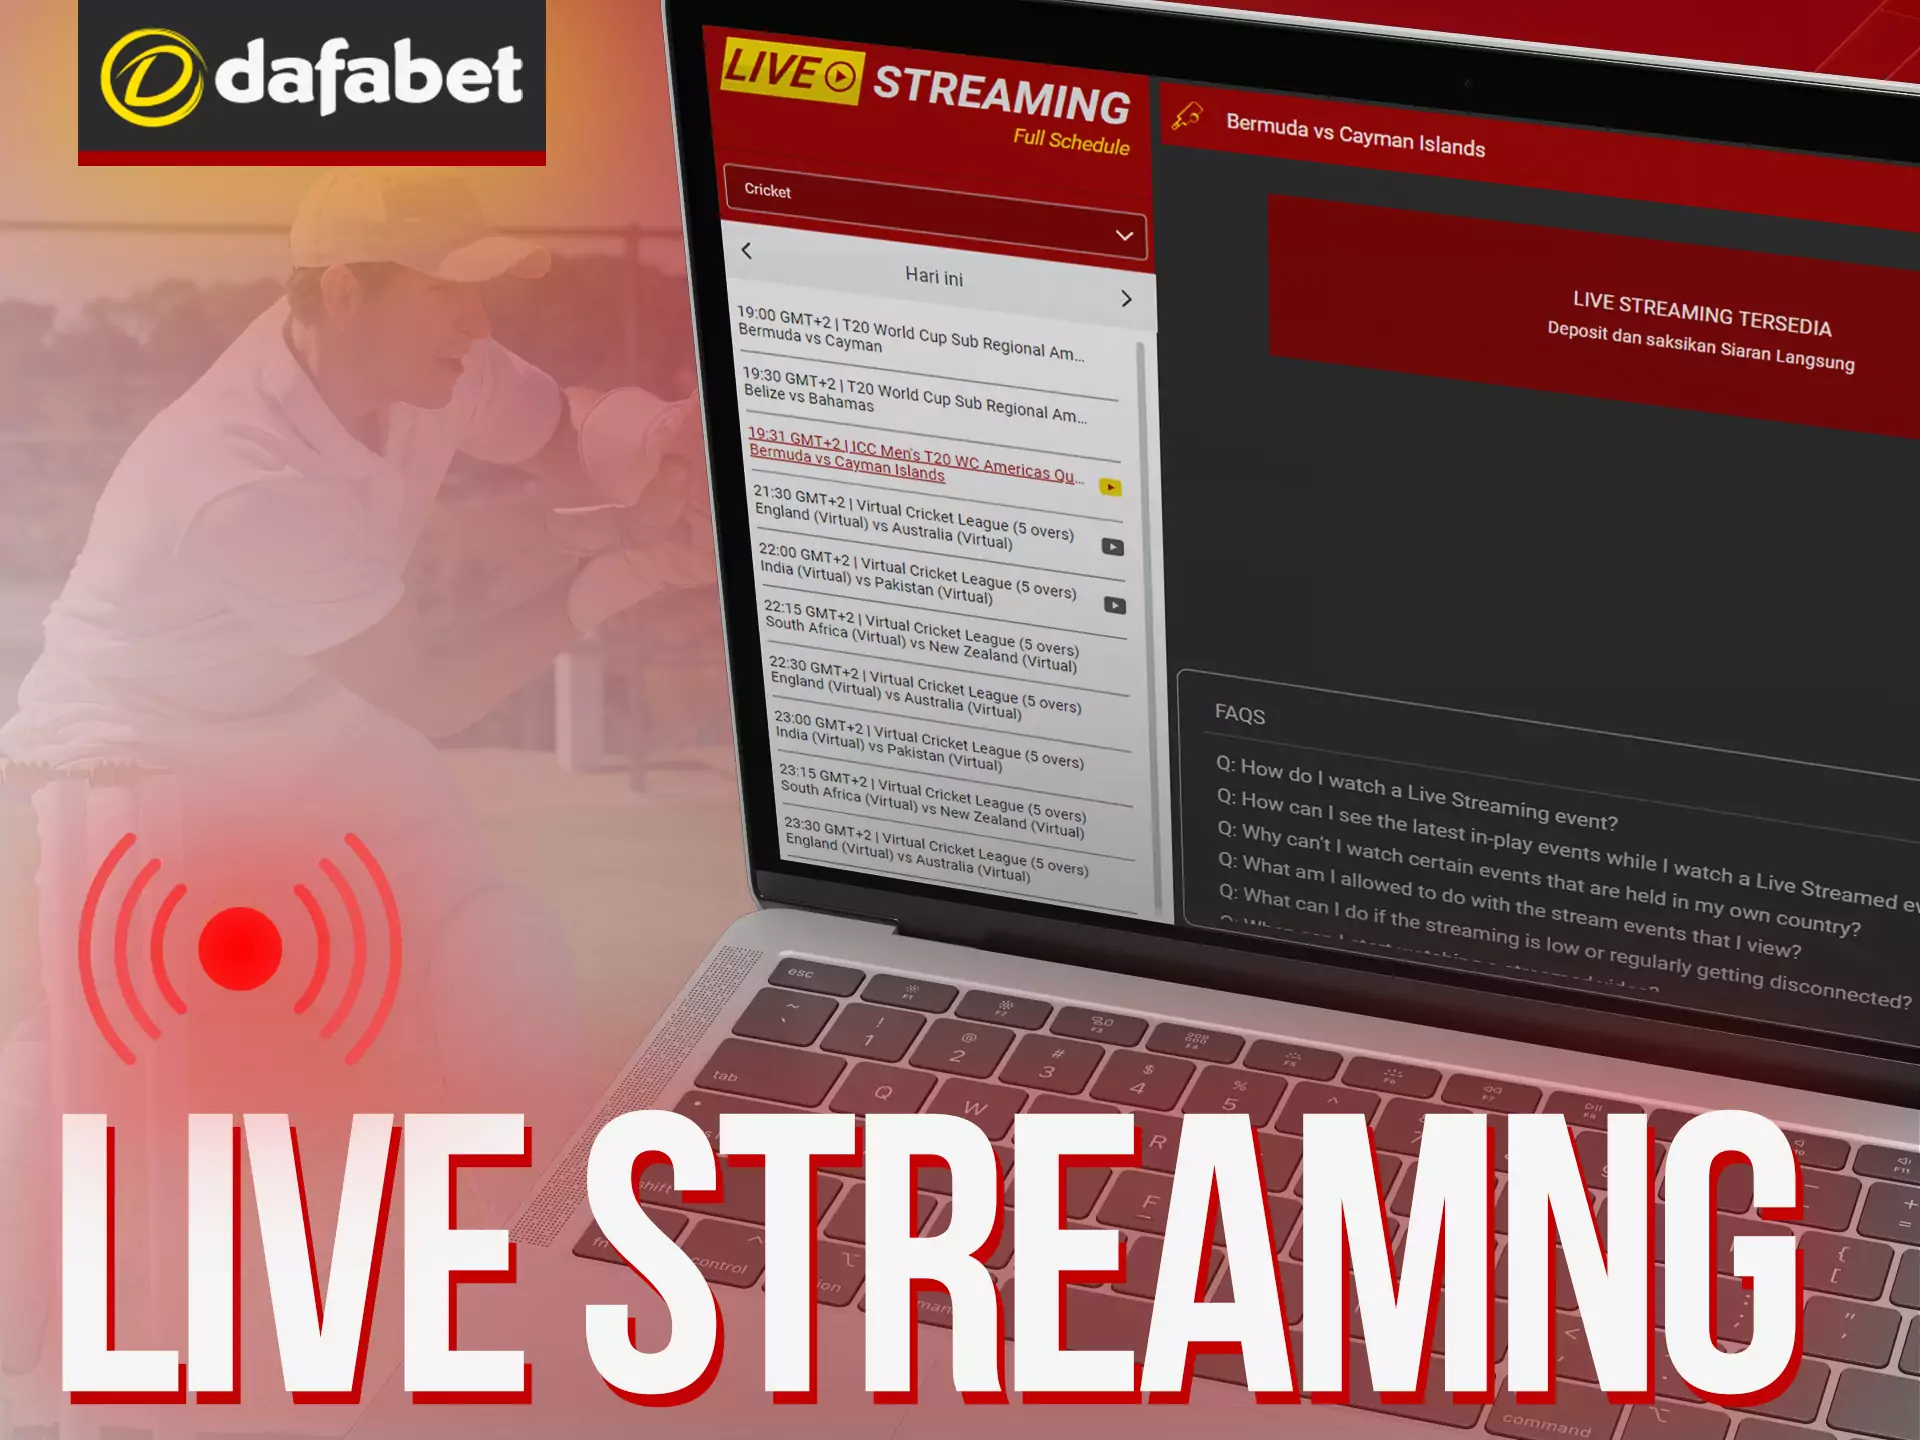 Bet on sports at Dafabet in live matches.